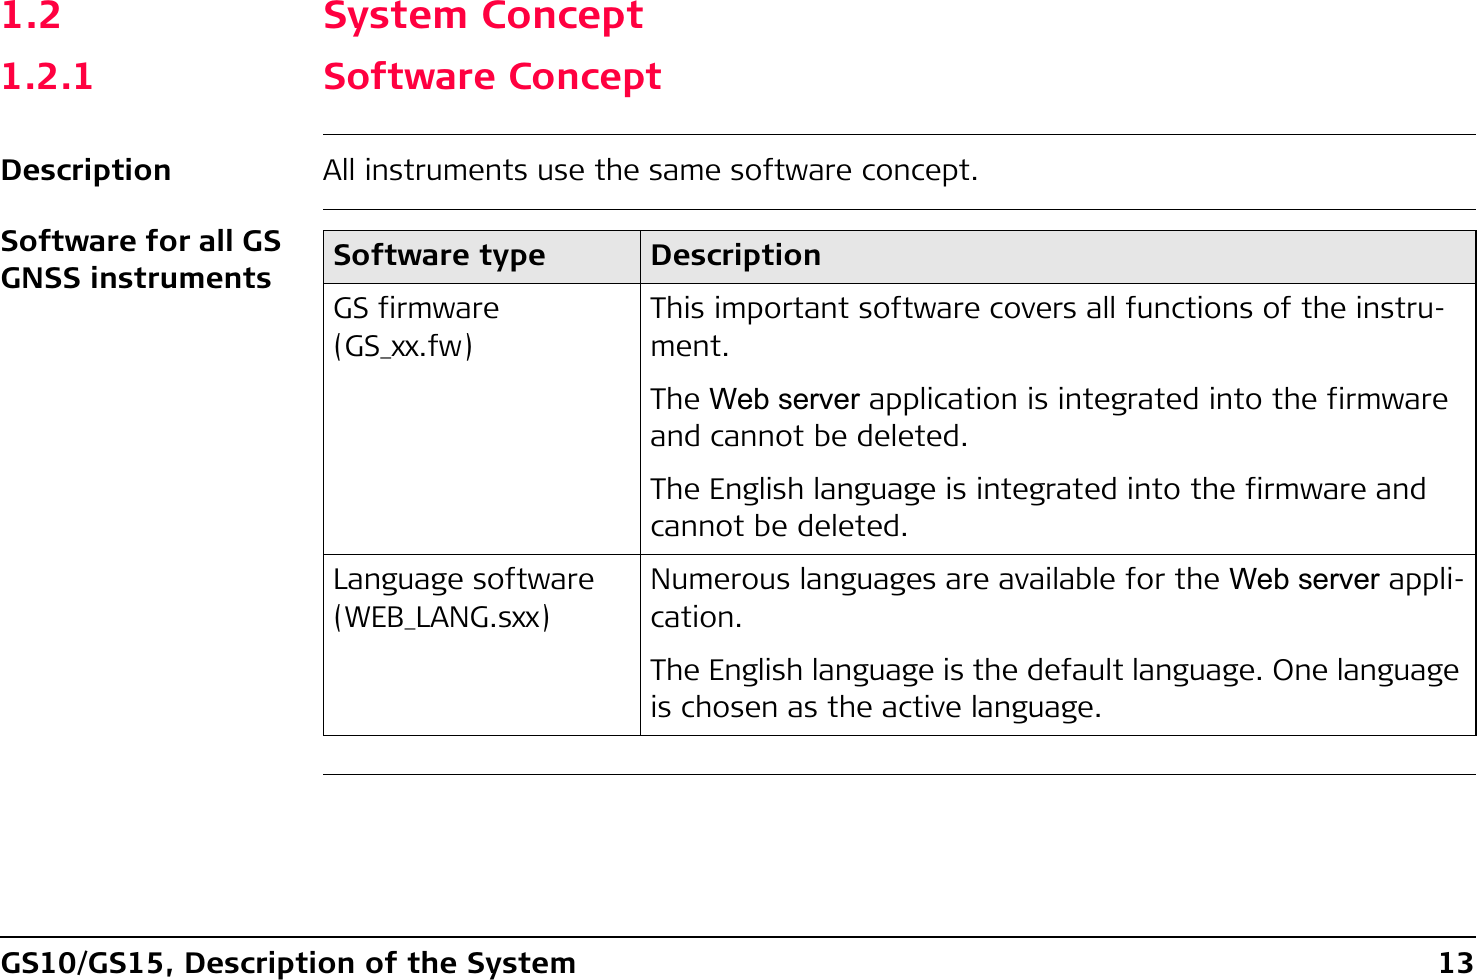 GS10/GS15, Description of the System 131.2 System Concept1.2.1 Software ConceptDescription All instruments use the same software concept.Software for all GS GNSS instruments Software type DescriptionGS firmware(GS_xx.fw)This important software covers all functions of the instru-ment.The Web server application is integrated into the firmware and cannot be deleted.The English language is integrated into the firmware and cannot be deleted.Language software(WEB_LANG.sxx)Numerous languages are available for the Web server appli-cation.The English language is the default language. One language is chosen as the active language.